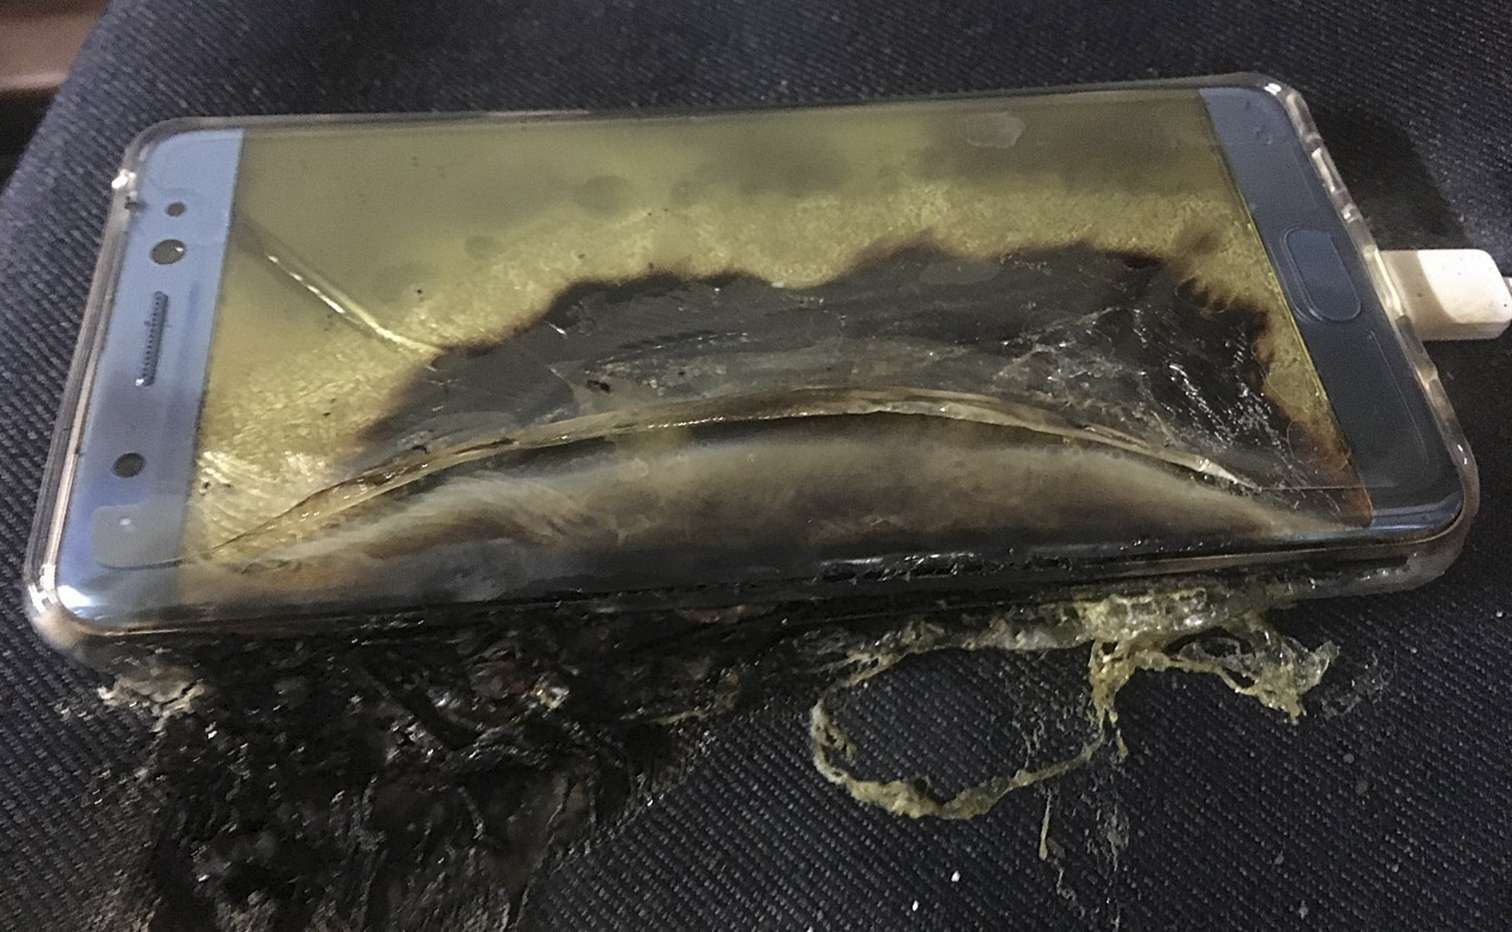 A Samsung Galaxy Note 7 phone after the battery exploded. Photo: SMP Pictures